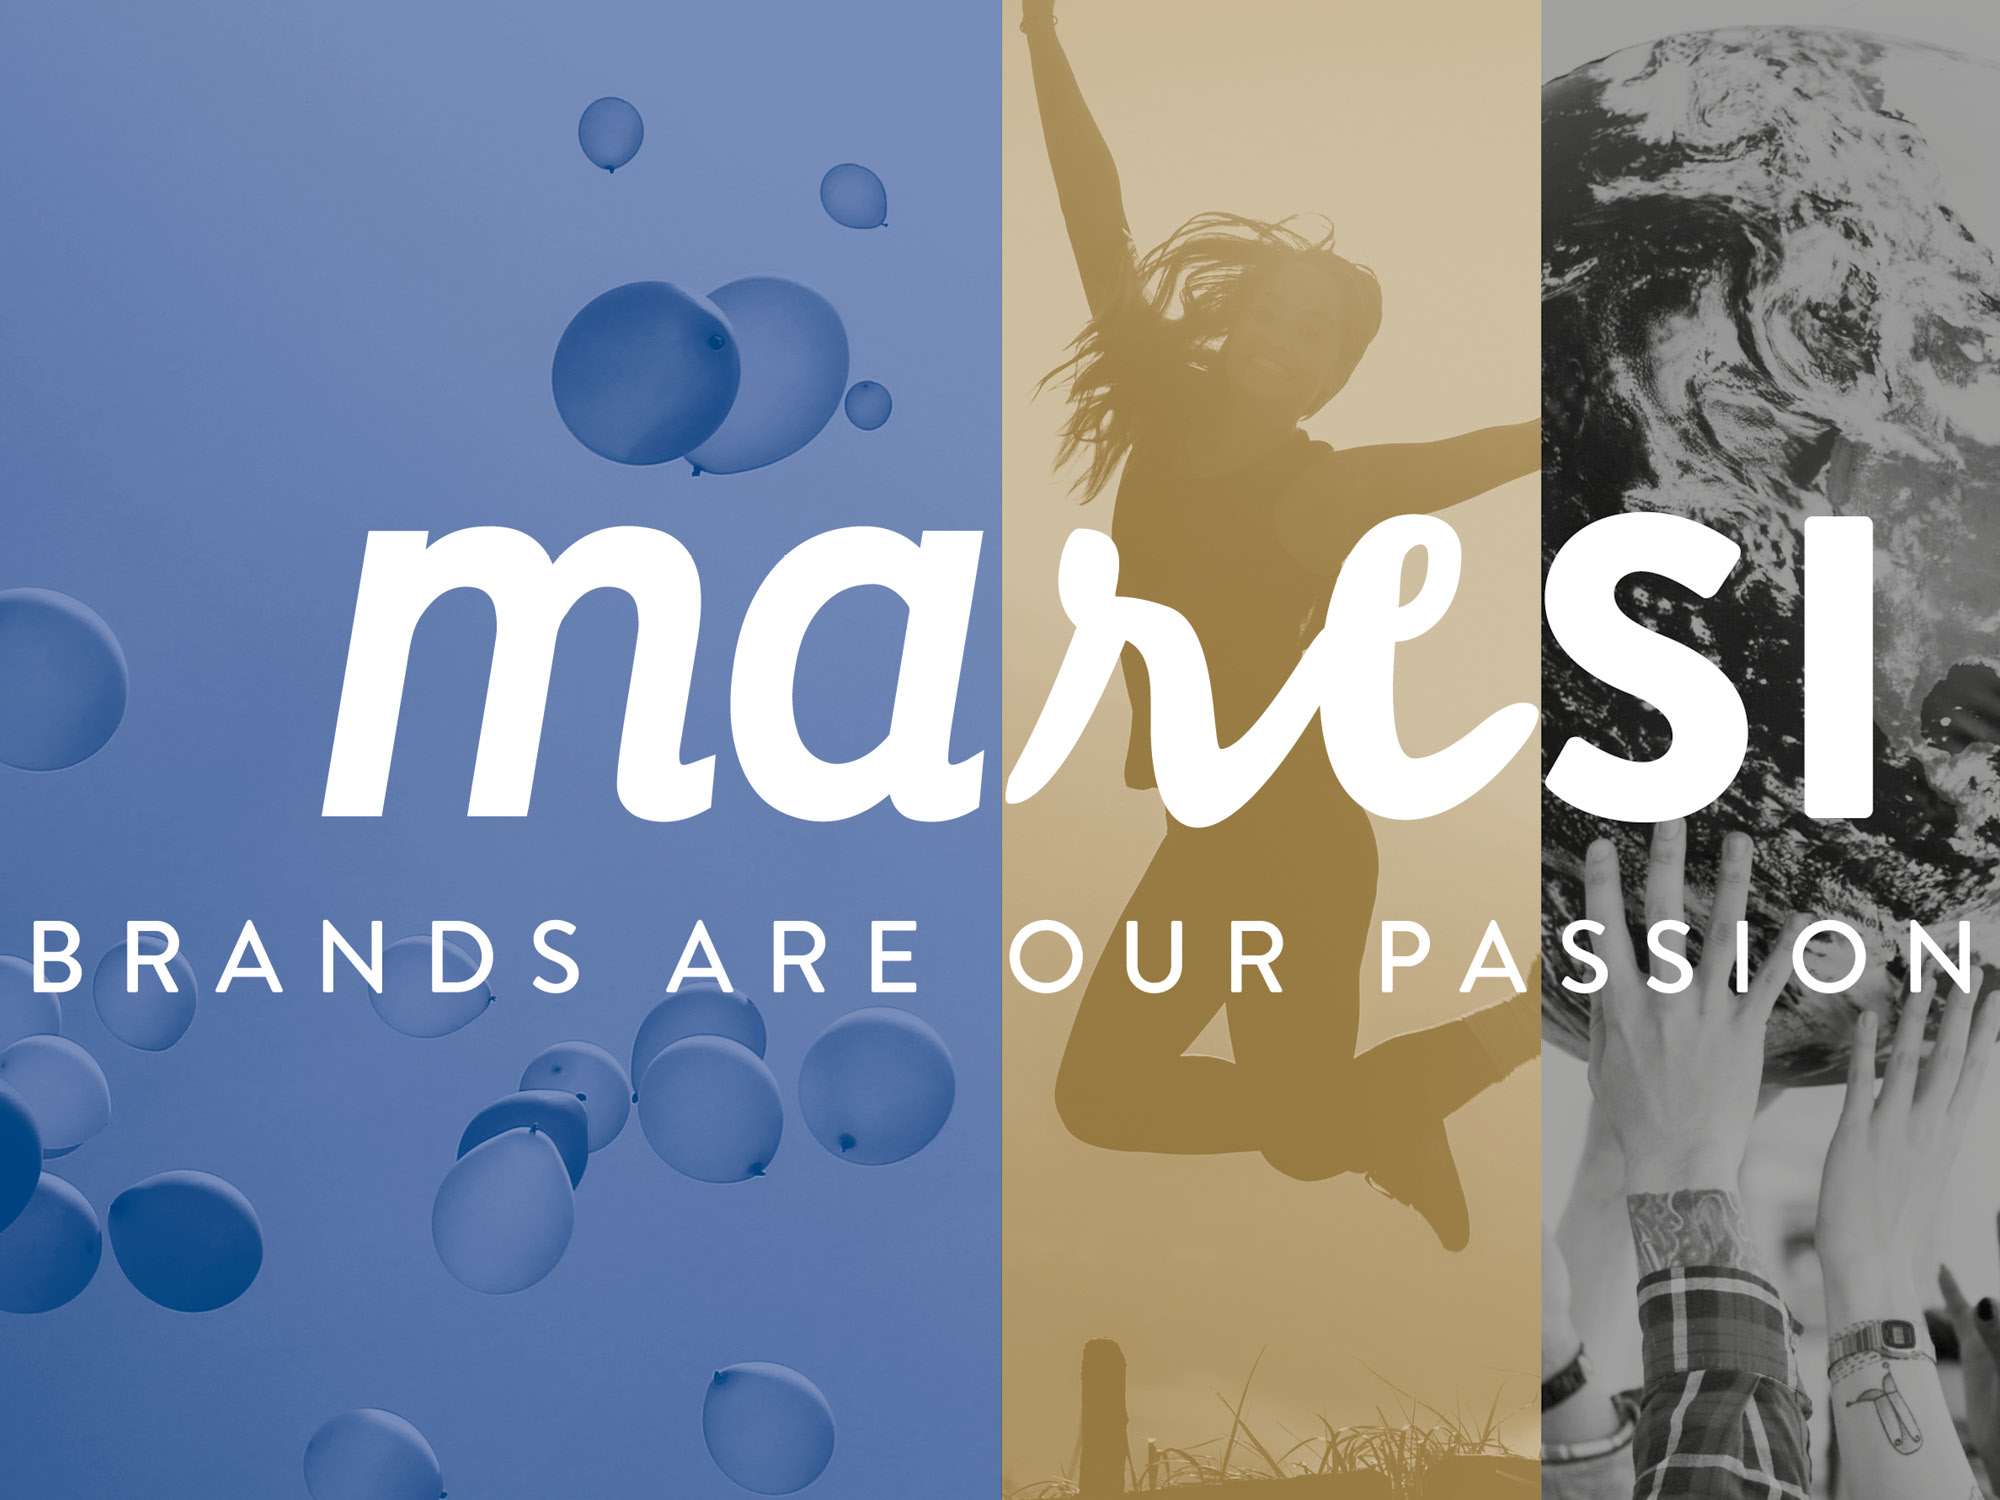 MARESI - with the special passion for branded goods